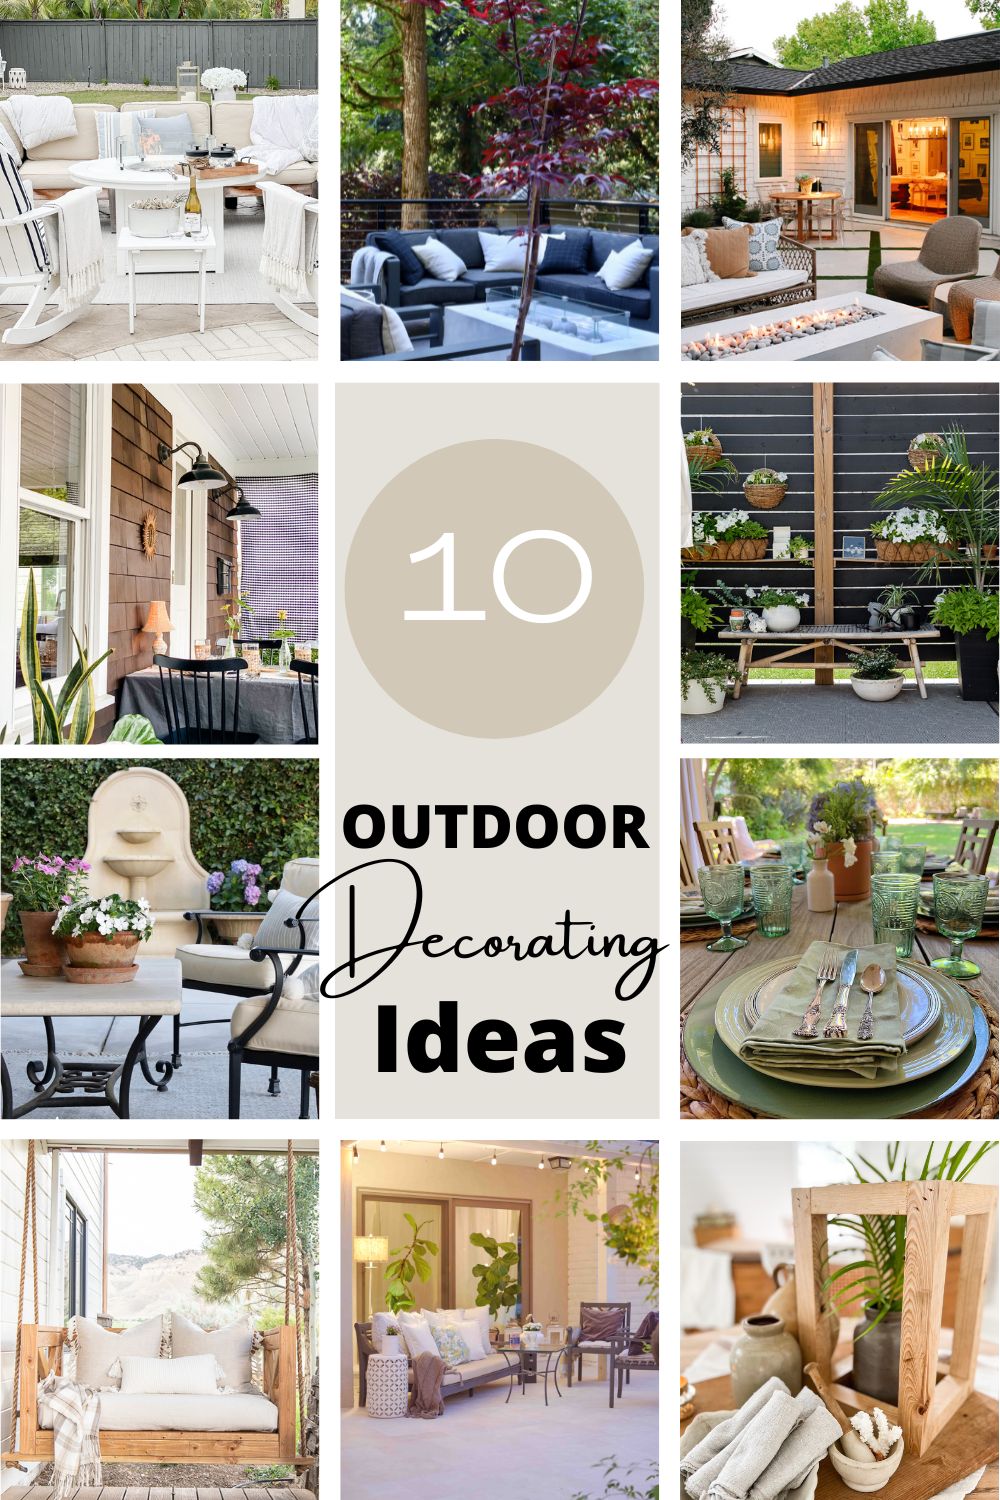 Southern California promises summer days and nights full of outside dining and entertaining. Today I am sharing some fun outdoor living ideas.